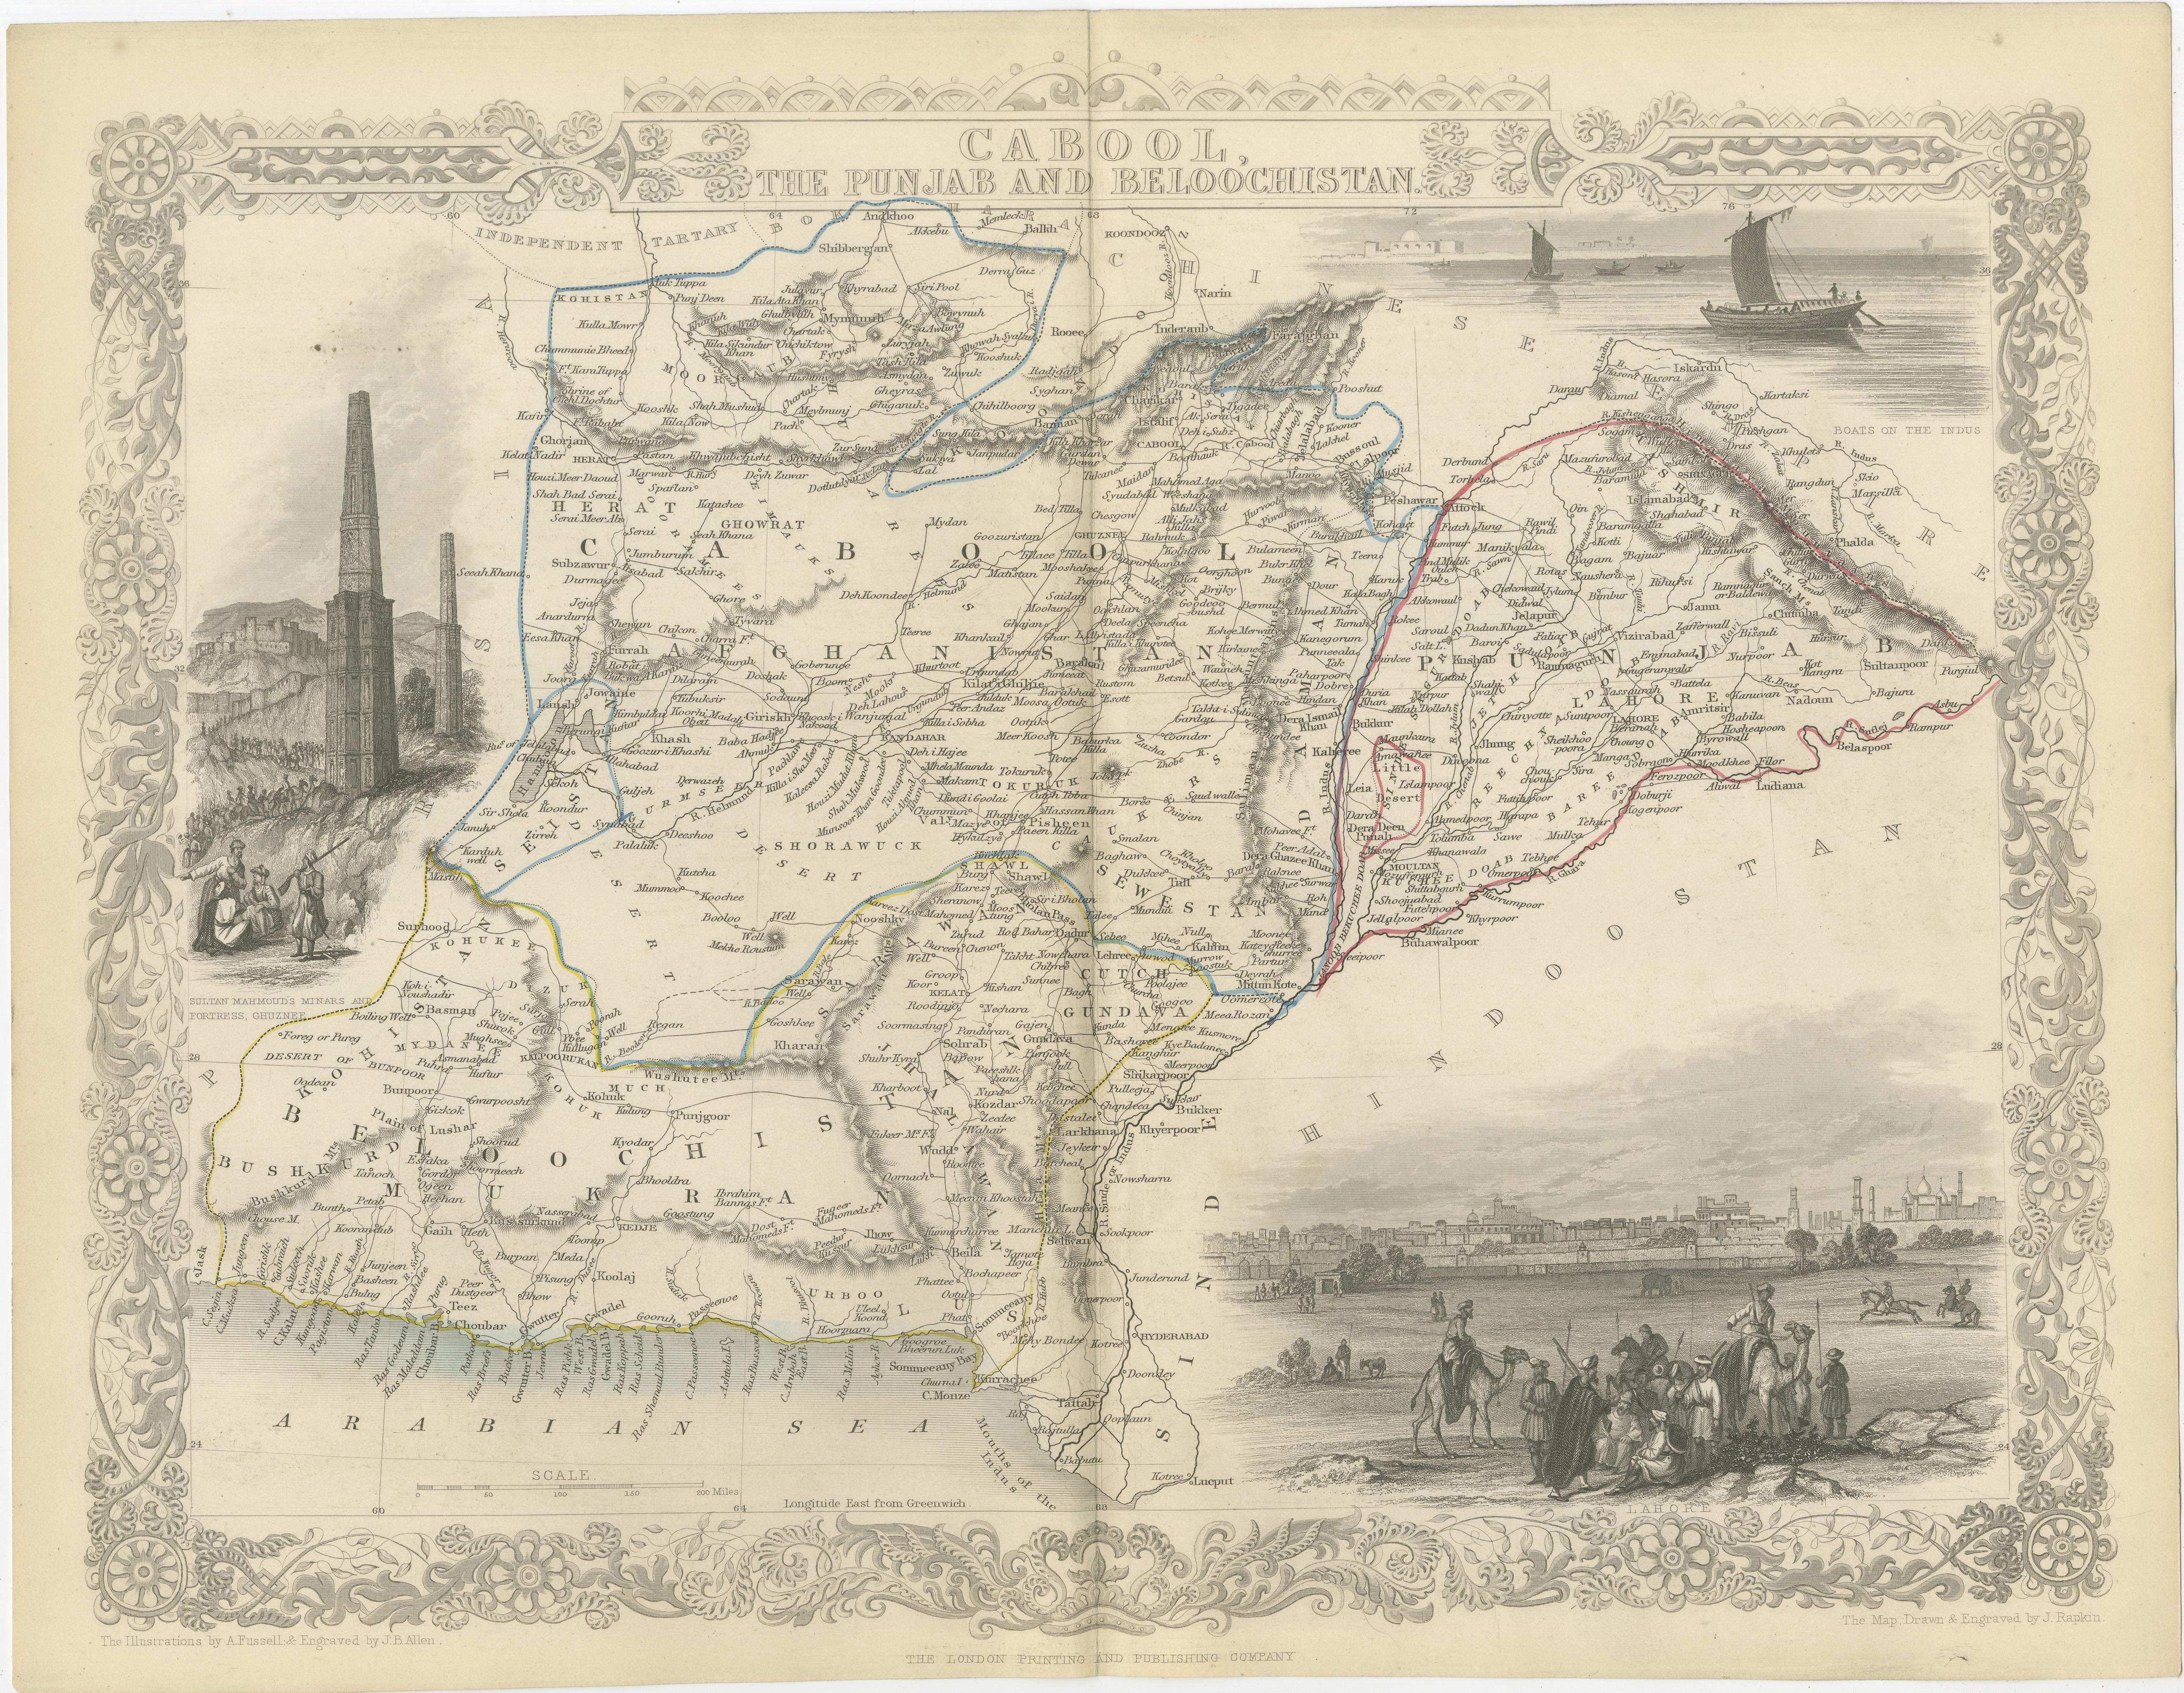 Paper An Illustrated Map of Kabul, Punjab, and Baluchistan by Tallis, 1851 For Sale